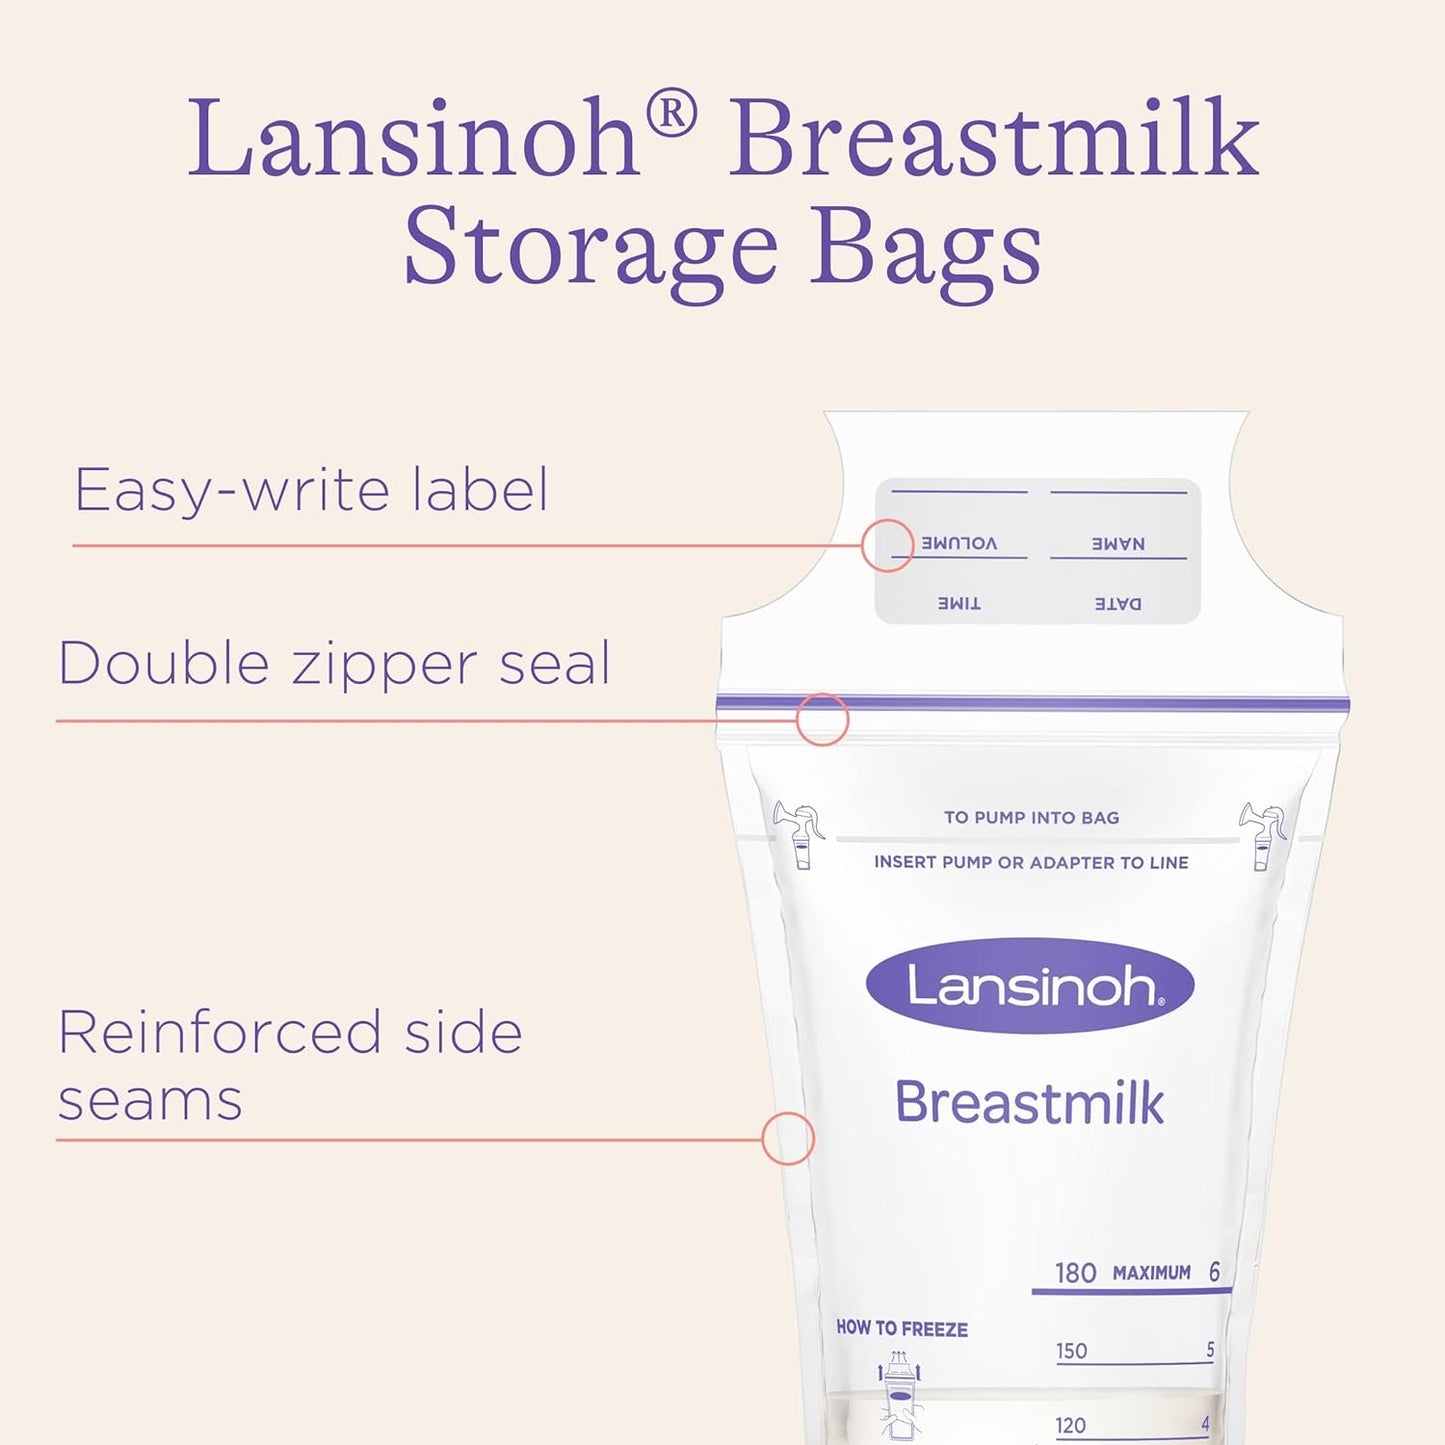 Lansinoh Breastmilk Storage Bags, 100 Count, 6 Ounce, Easy to Use Milk Storage Bags for Breastfeeding, Presterilized, Hygienically Doubled-Sealed, for Refrigeration and Freezing